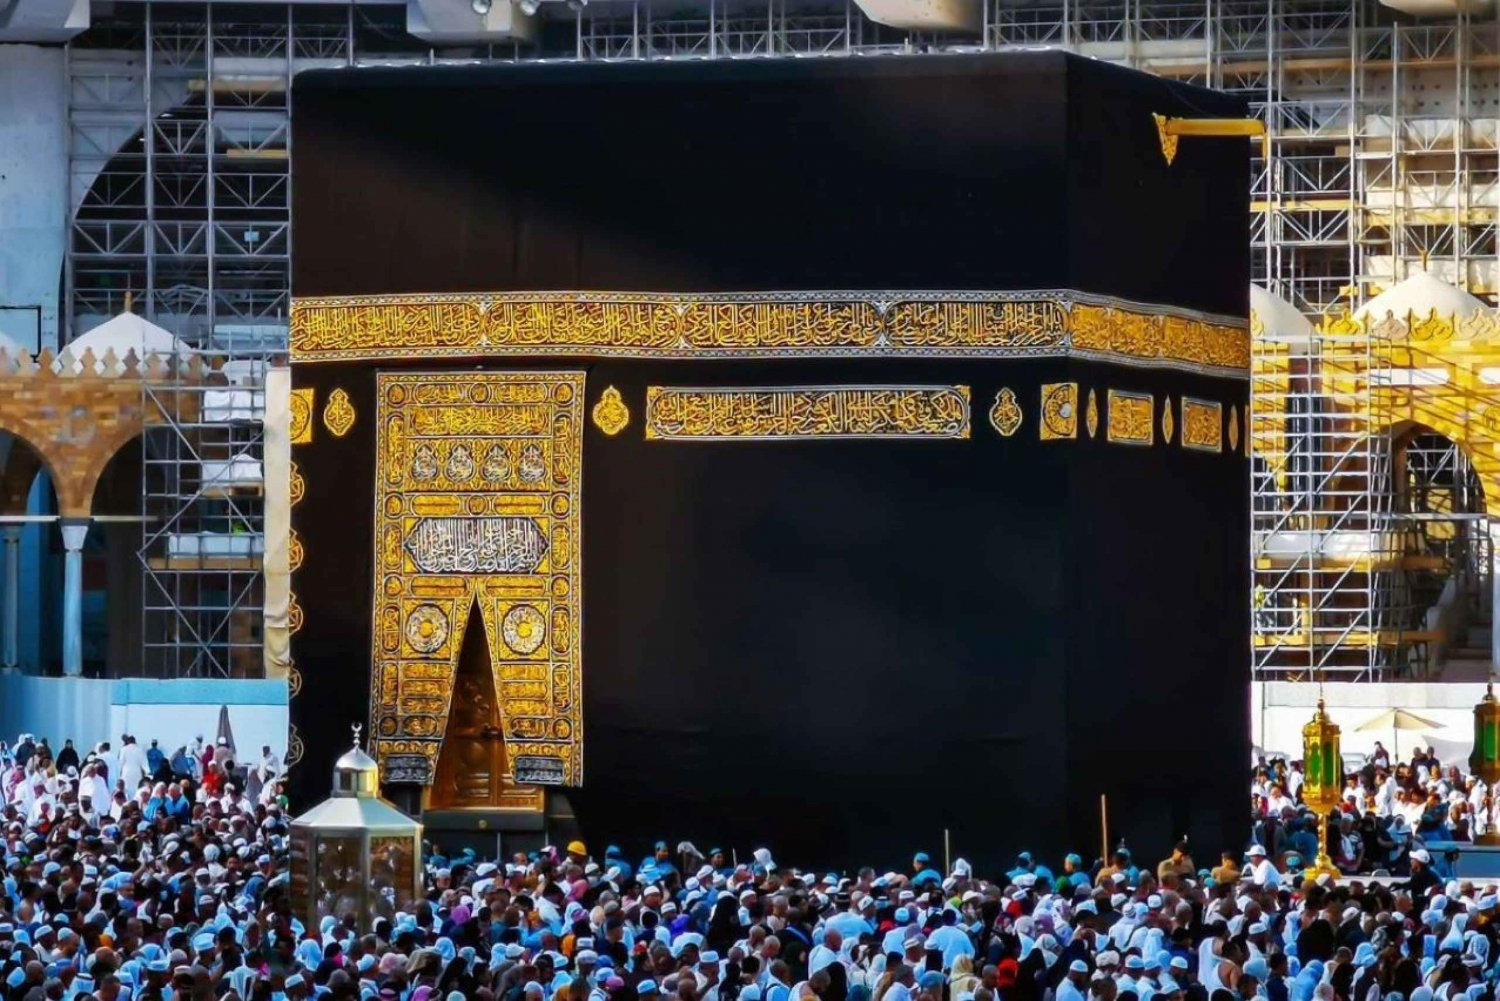 Jeddah: Mecca and Medina 7-Day Umrah Tour Package with Hotel